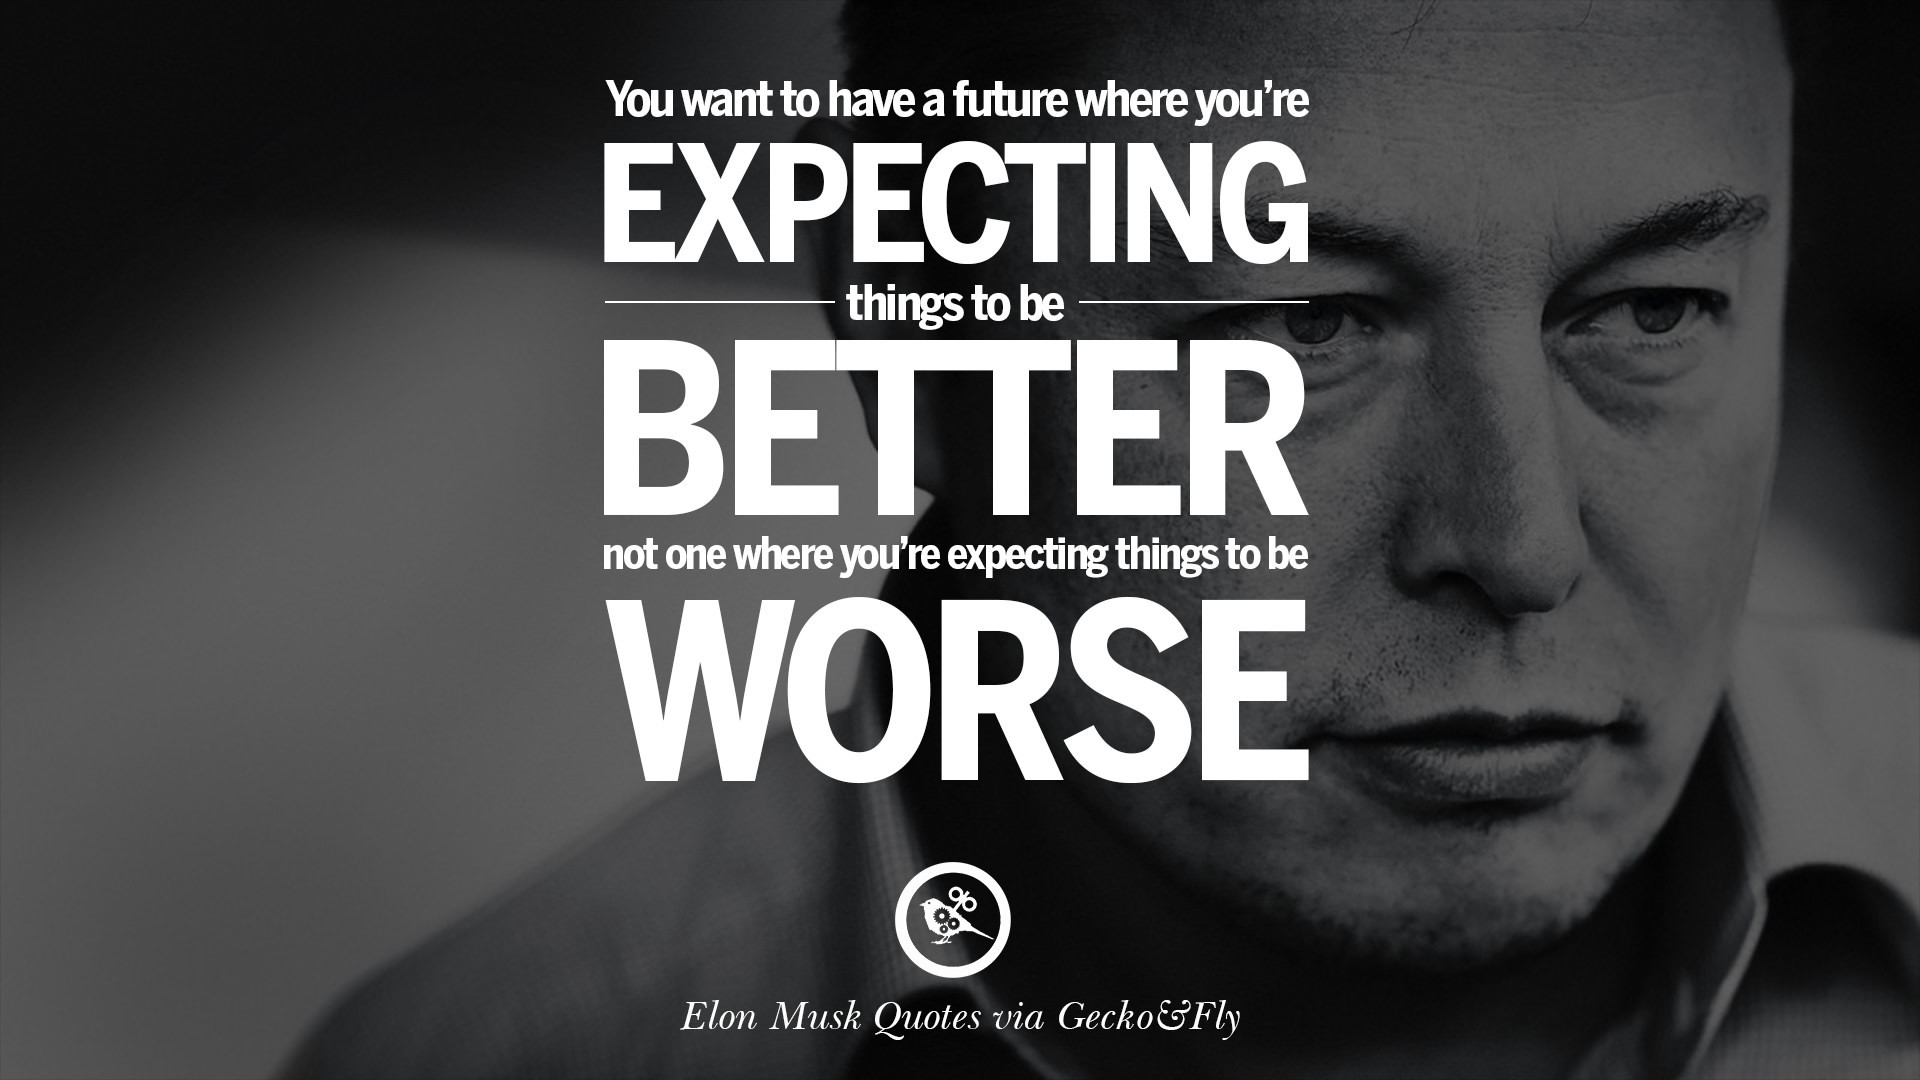 You want to have a future where you're expecting things to be better, not  one where you're expecting things to be worse.